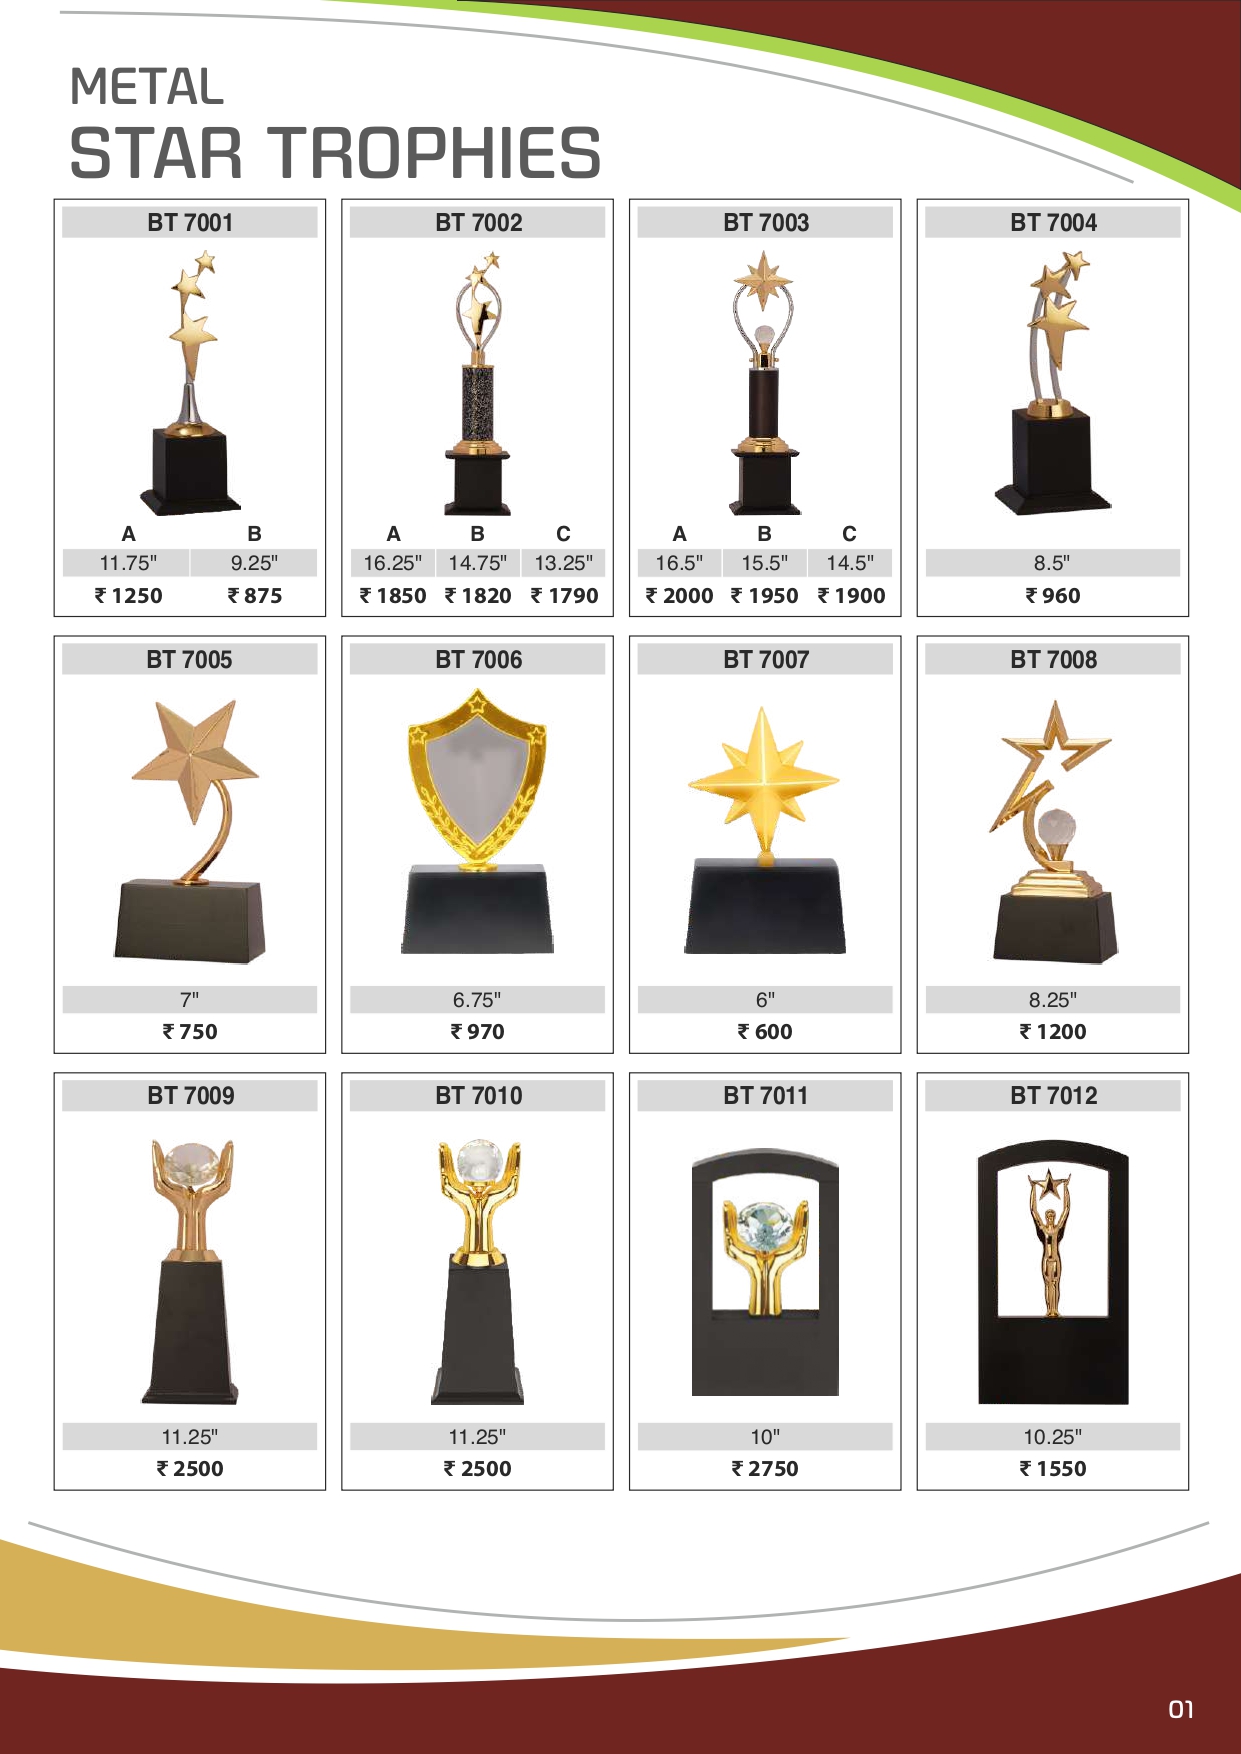 Saga Sports And Trophies - Service - Metal Star Trophies